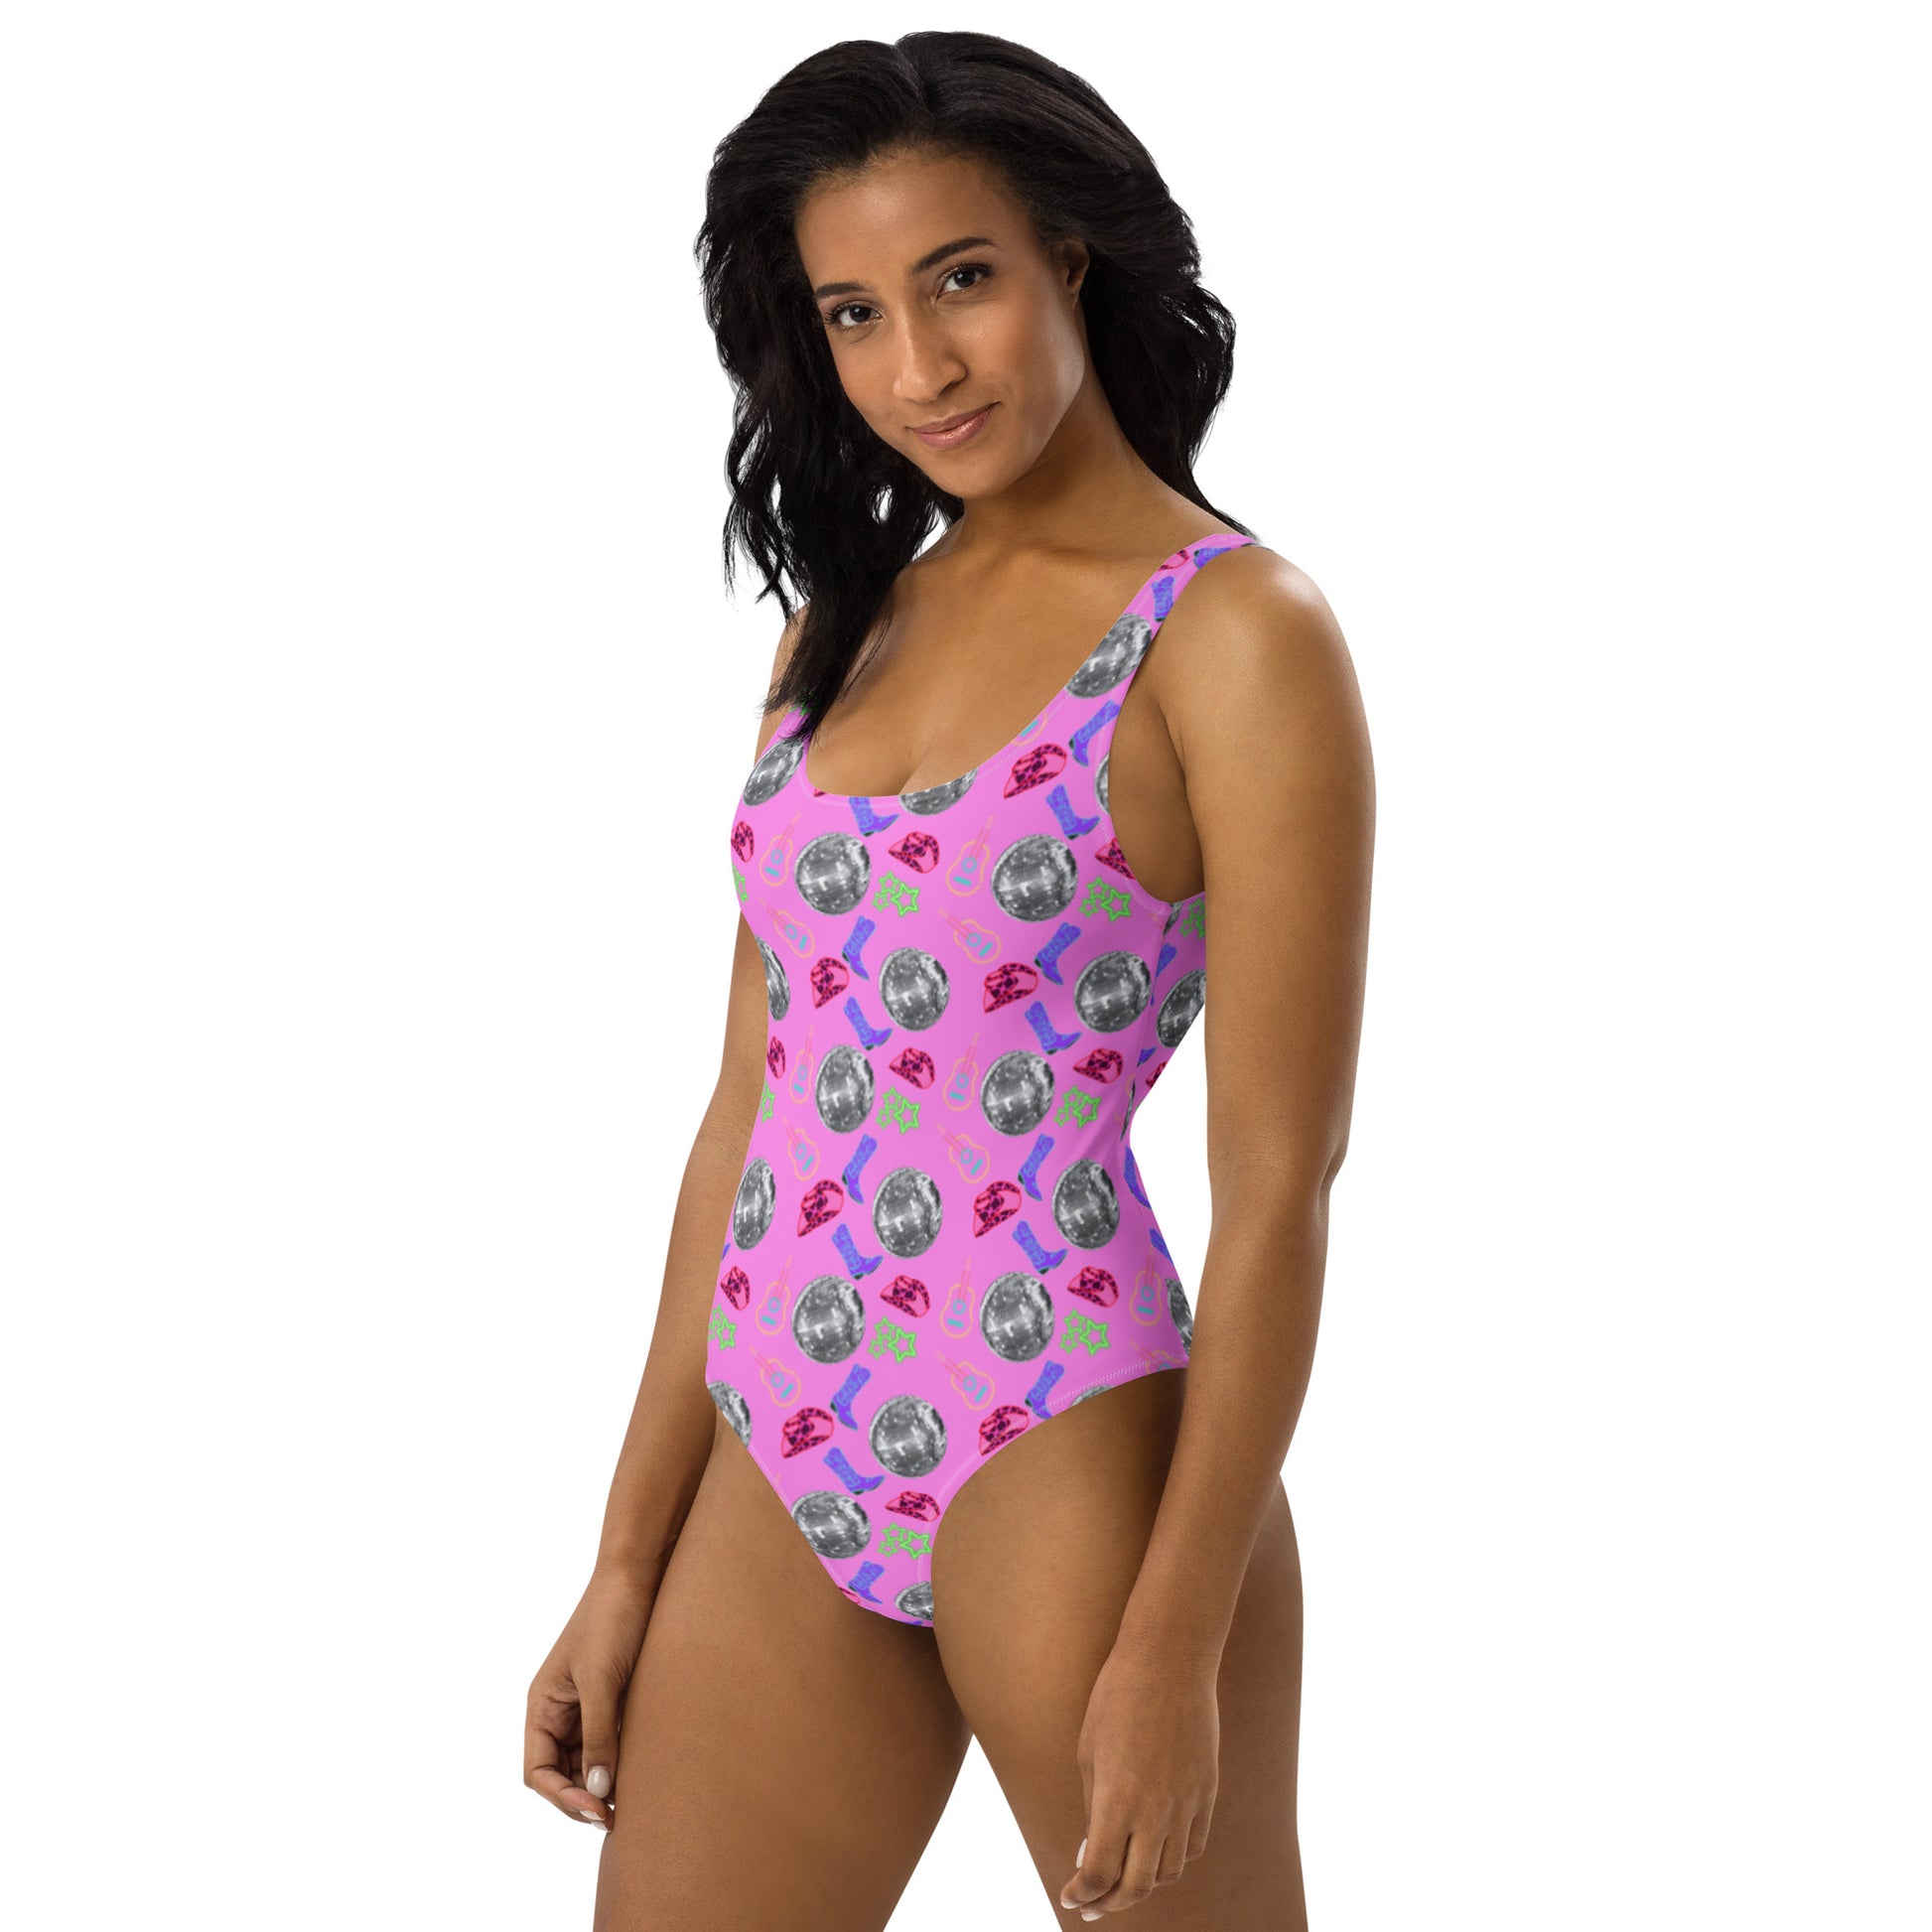 Yeehaw Disco Cowgirl One-Piece Swimsuit - #onepiece, #op, #swim, #swimming, #swimmingsuit, #swimsuit, #swimsuits, #westernswimsuit, bikini swim suit, bikini swim wear, cowboy boots, disco, disco cowgirl, pink, swim suit, swim suits, swim waer, swim wear, swim wera, swimming suit, swimming suits, swimmingsuits, swimsui, swimsuts, swimwaer, swimwear, yeehaw swimsuit -  - Baha Ranch Western Wear